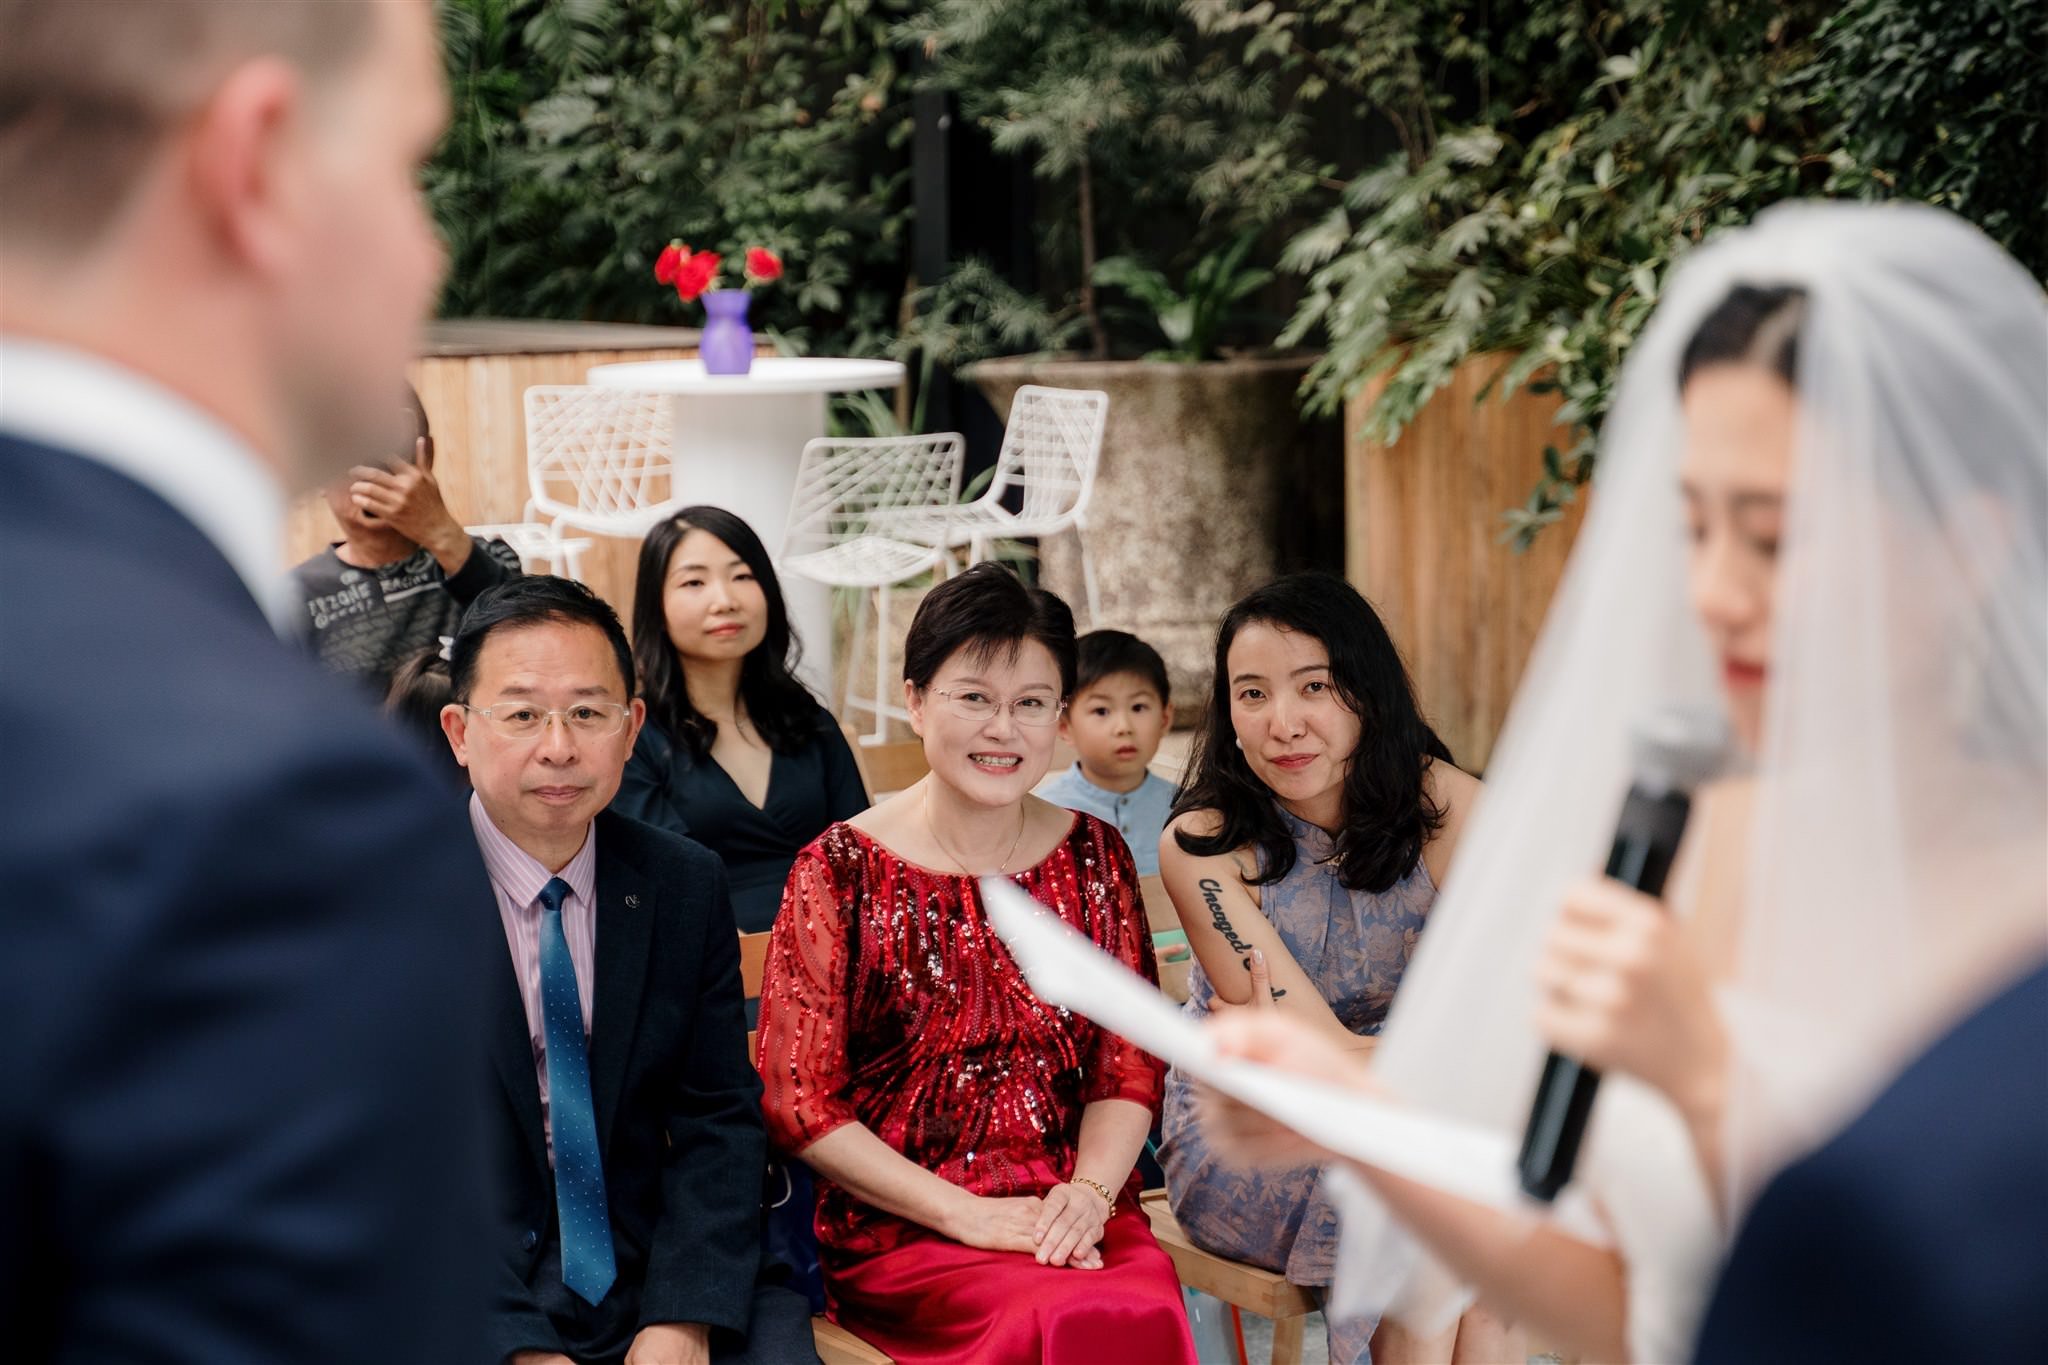 glasshouse-morningside-urban-best-auckland-wedding-venue-central-indoor-photographer-videographer-dear-white-productions-top-industrial-chinese-ceremony-tradition (69).jpg